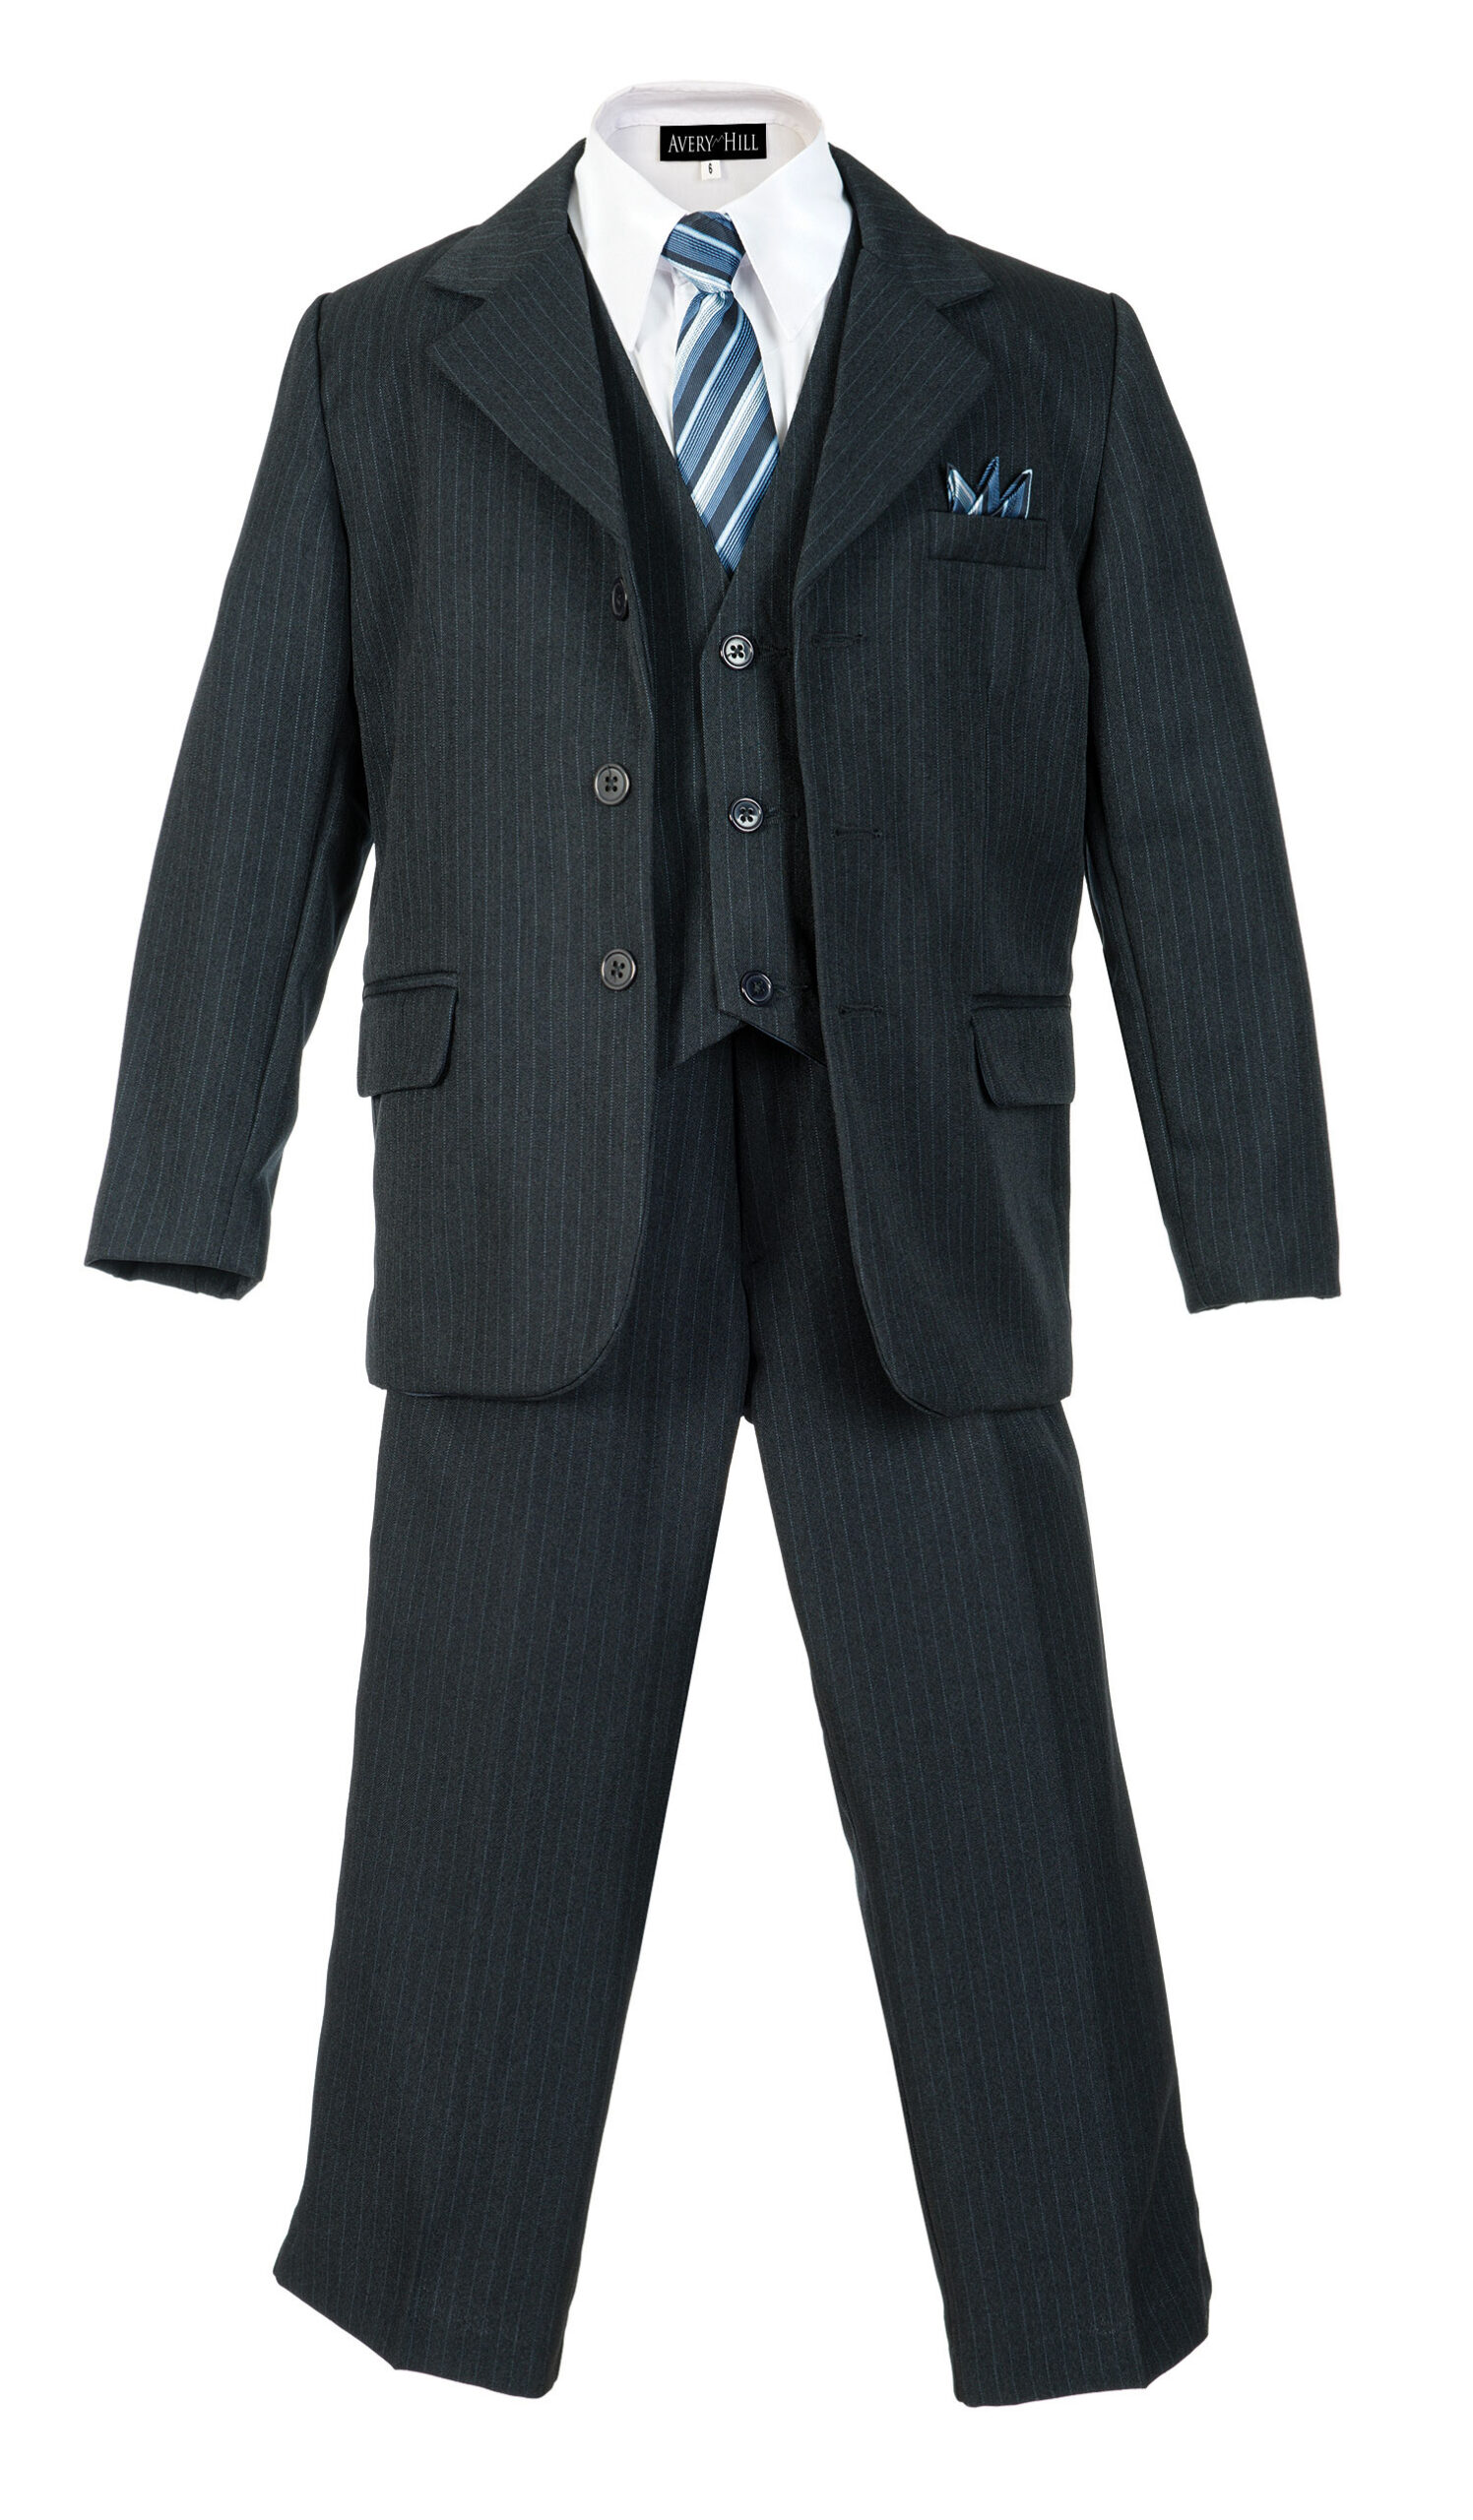 Boys Pinstripe Suit Set with Matching Tie NB 6